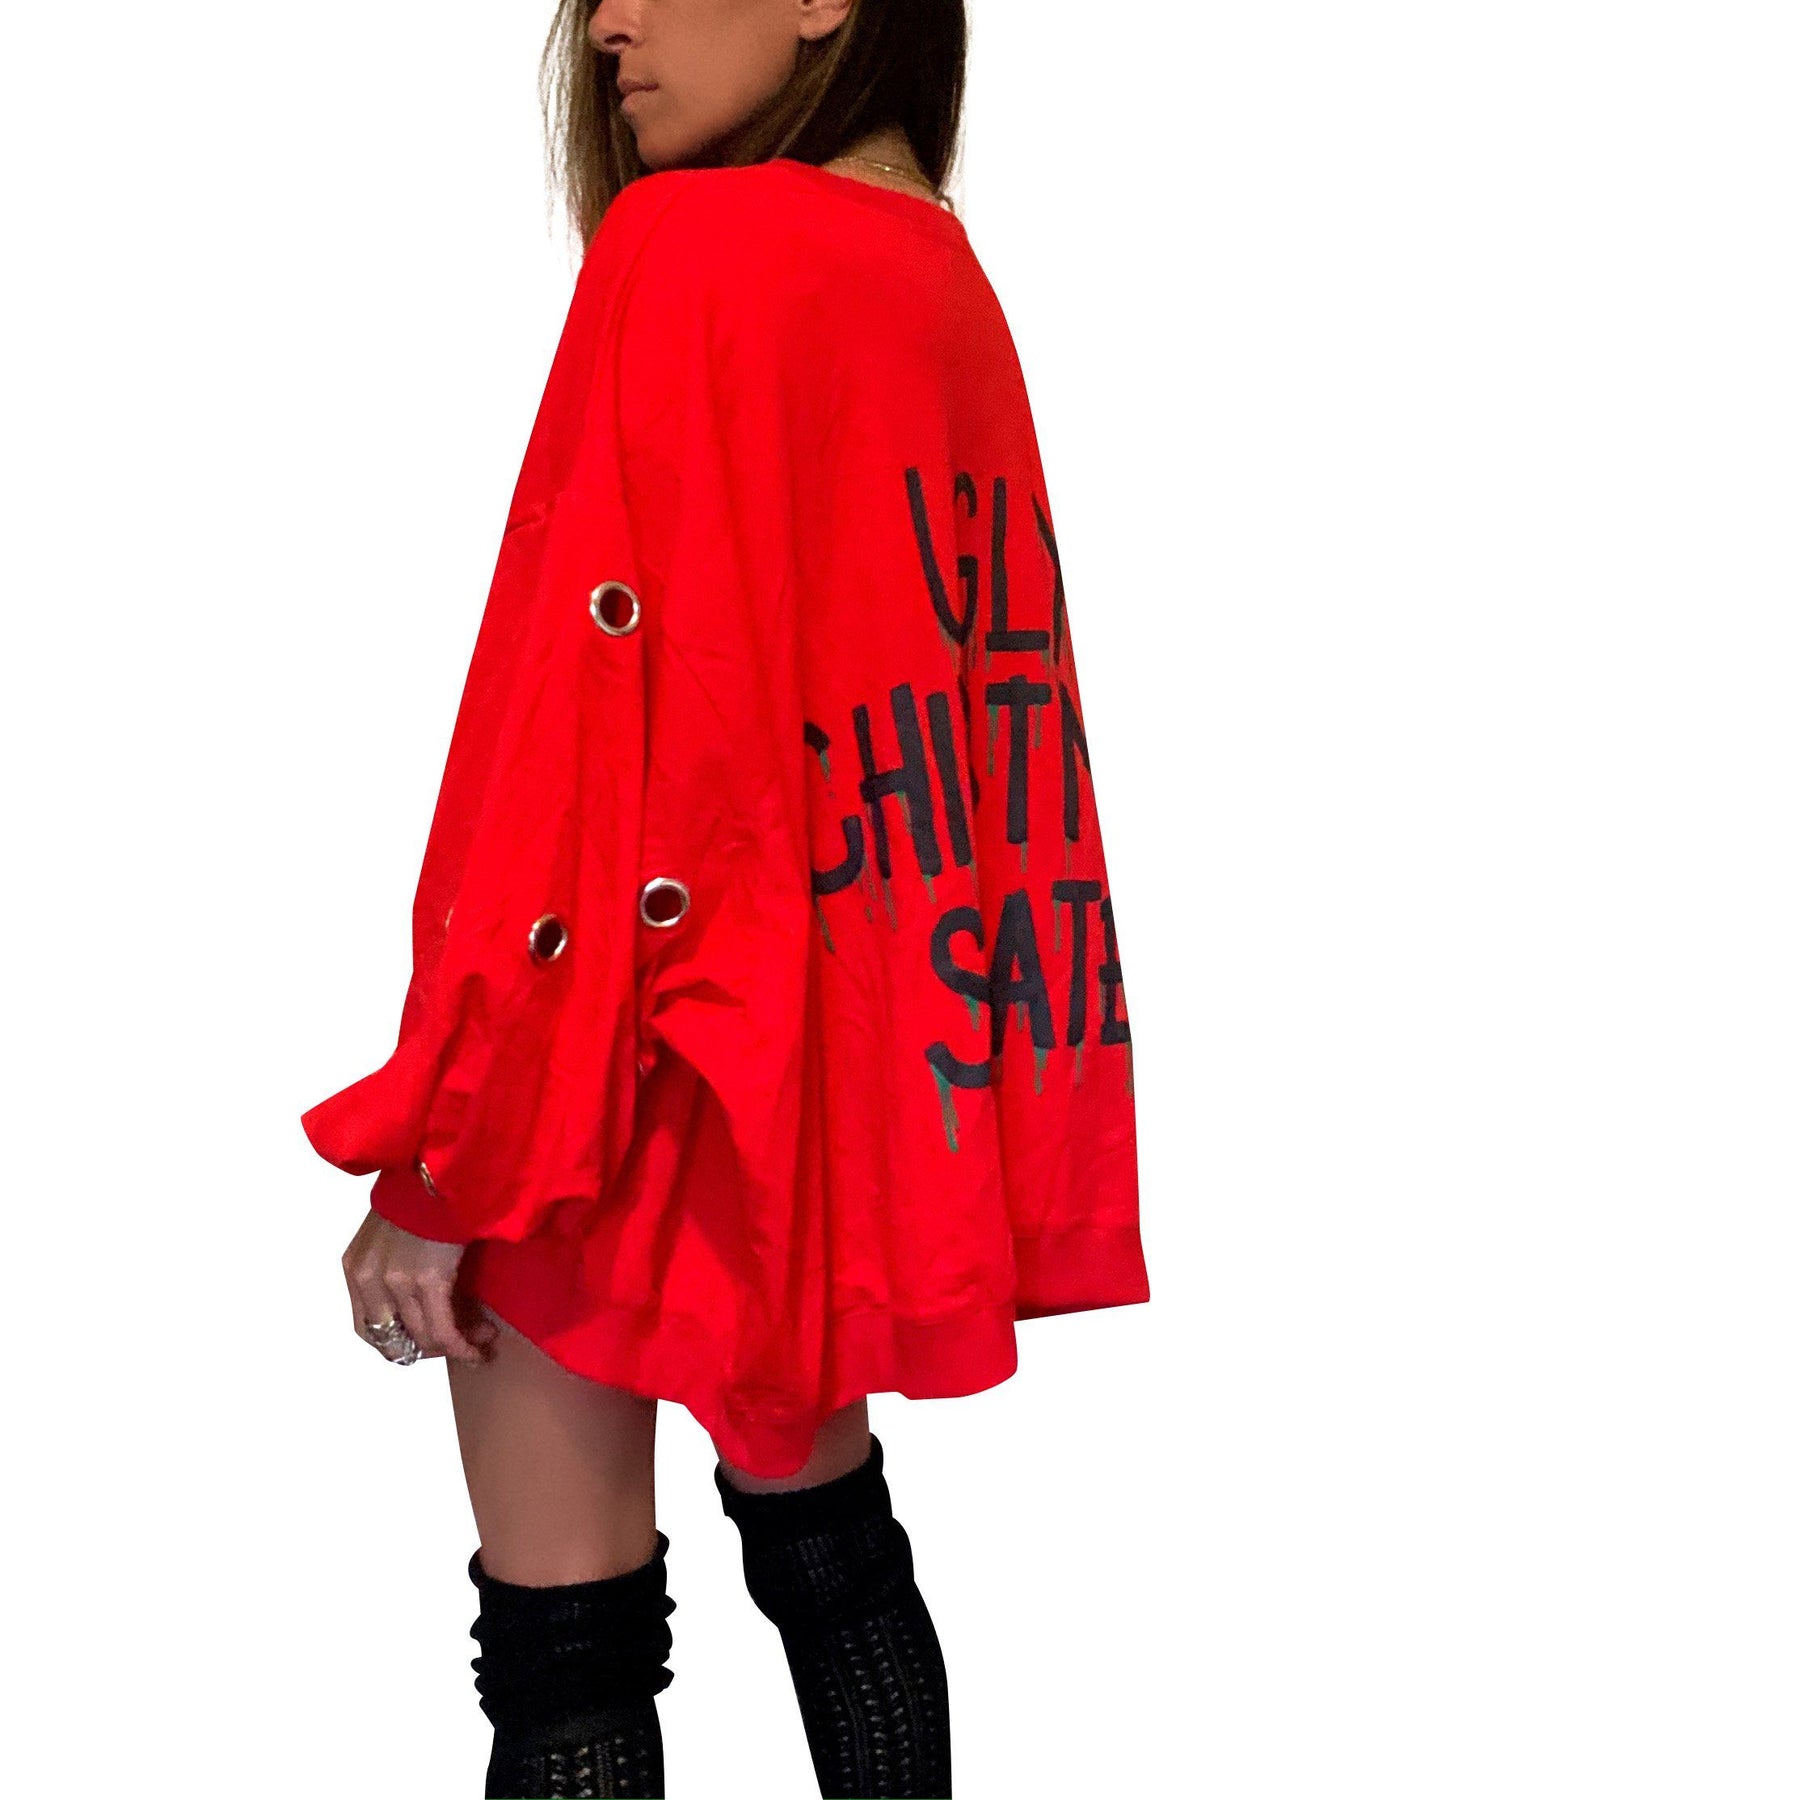 Oversized, batwing red sweatshirt with rings on sleeves. UGLY CHRISTMAS SWEATER painted on the back in black, with green paint drips coming from letters. Signed @wrenandglory